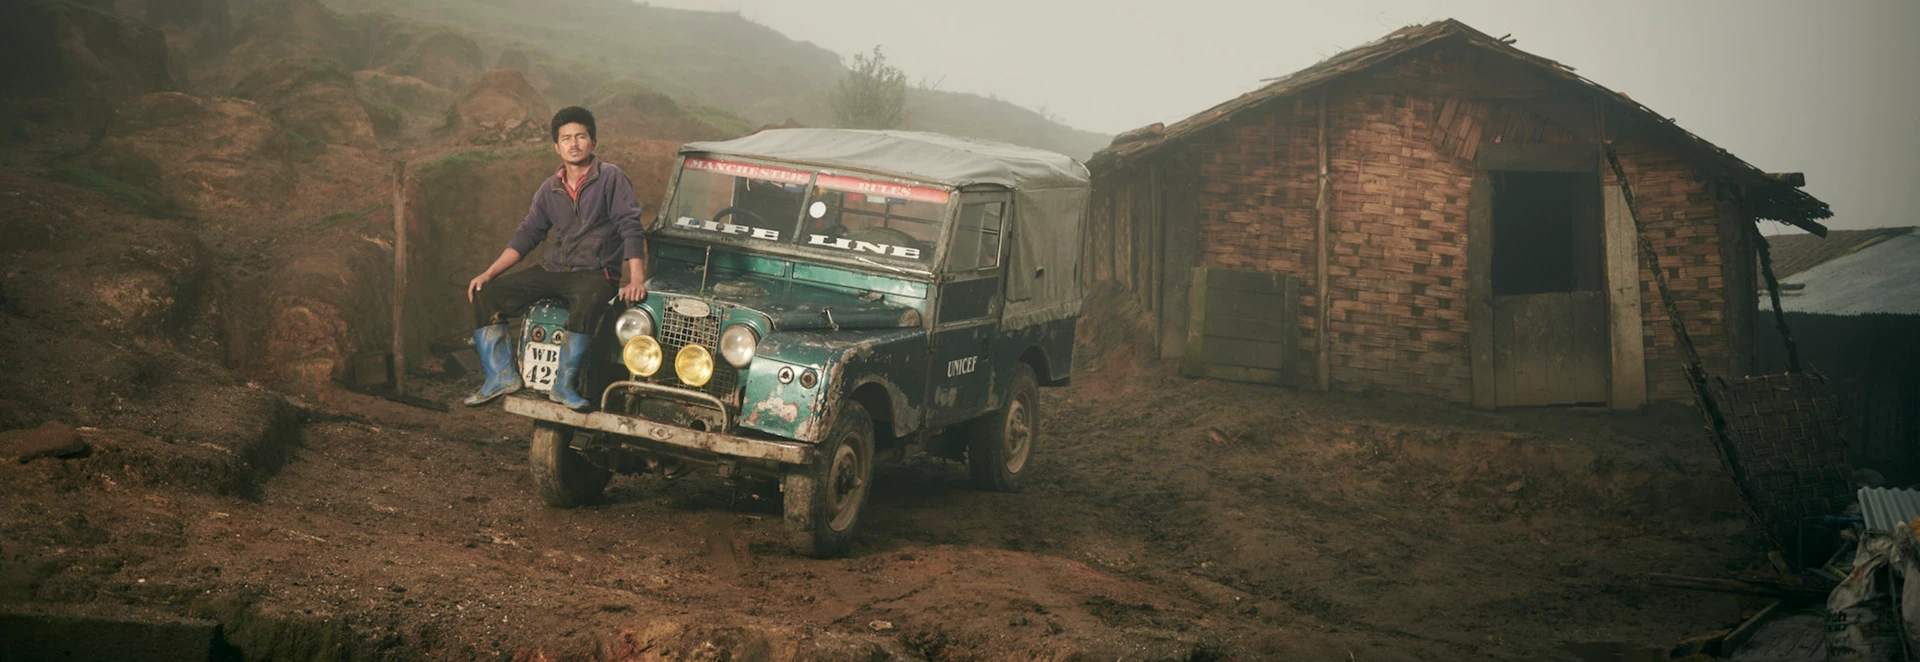 Land Rover travels to Land of Land Rovers for 70th anniversary